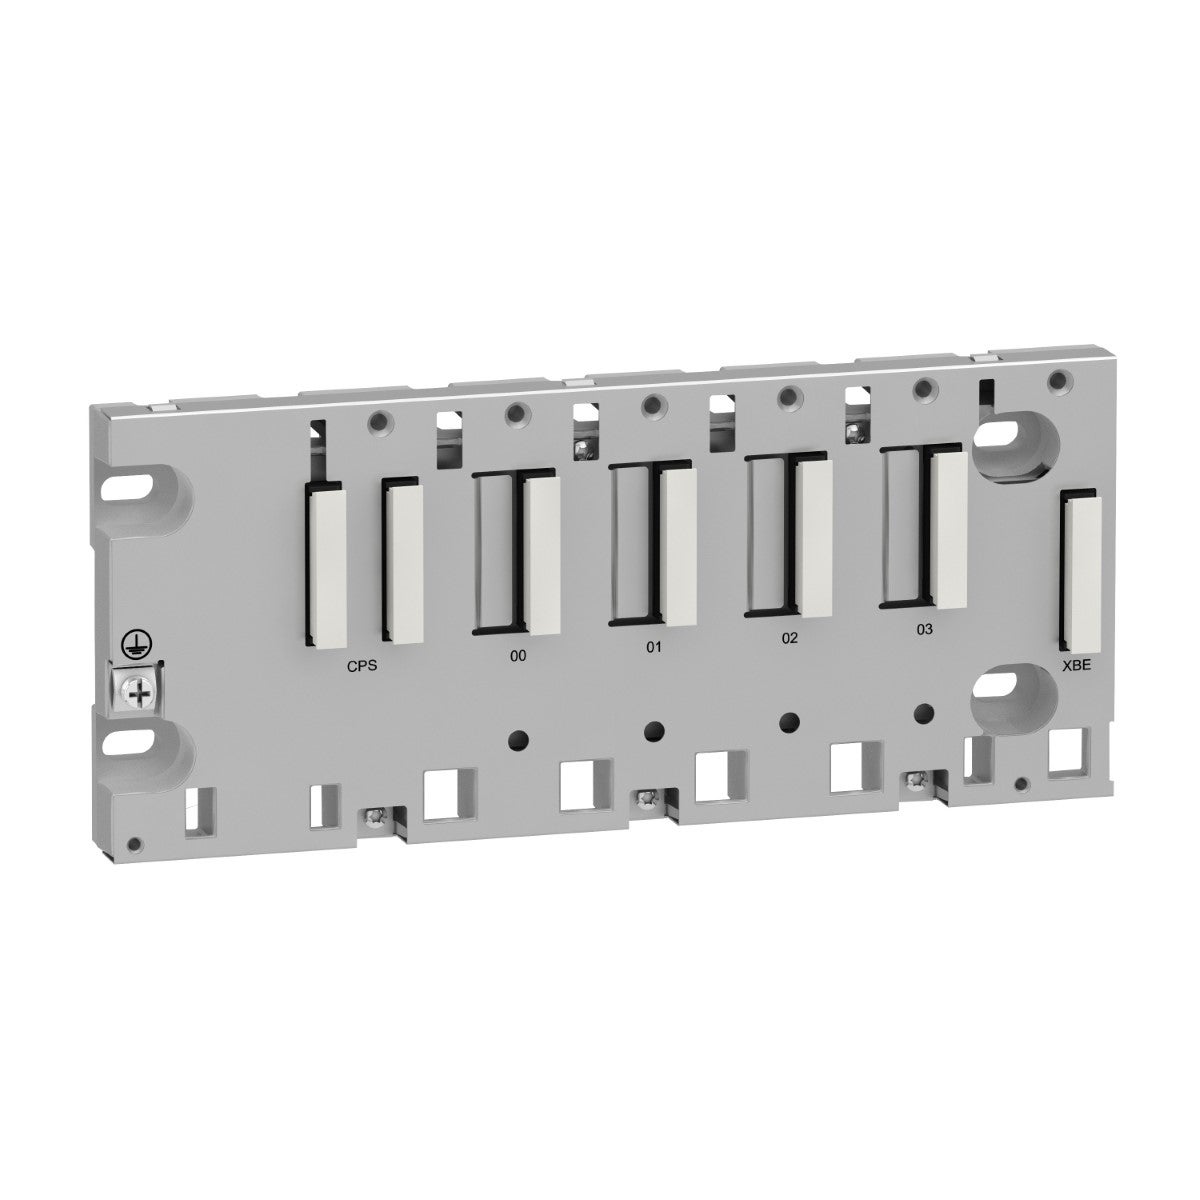 rack, Modicon M340 automation platform, 4 slots, panel, plate or DIN rail mounting